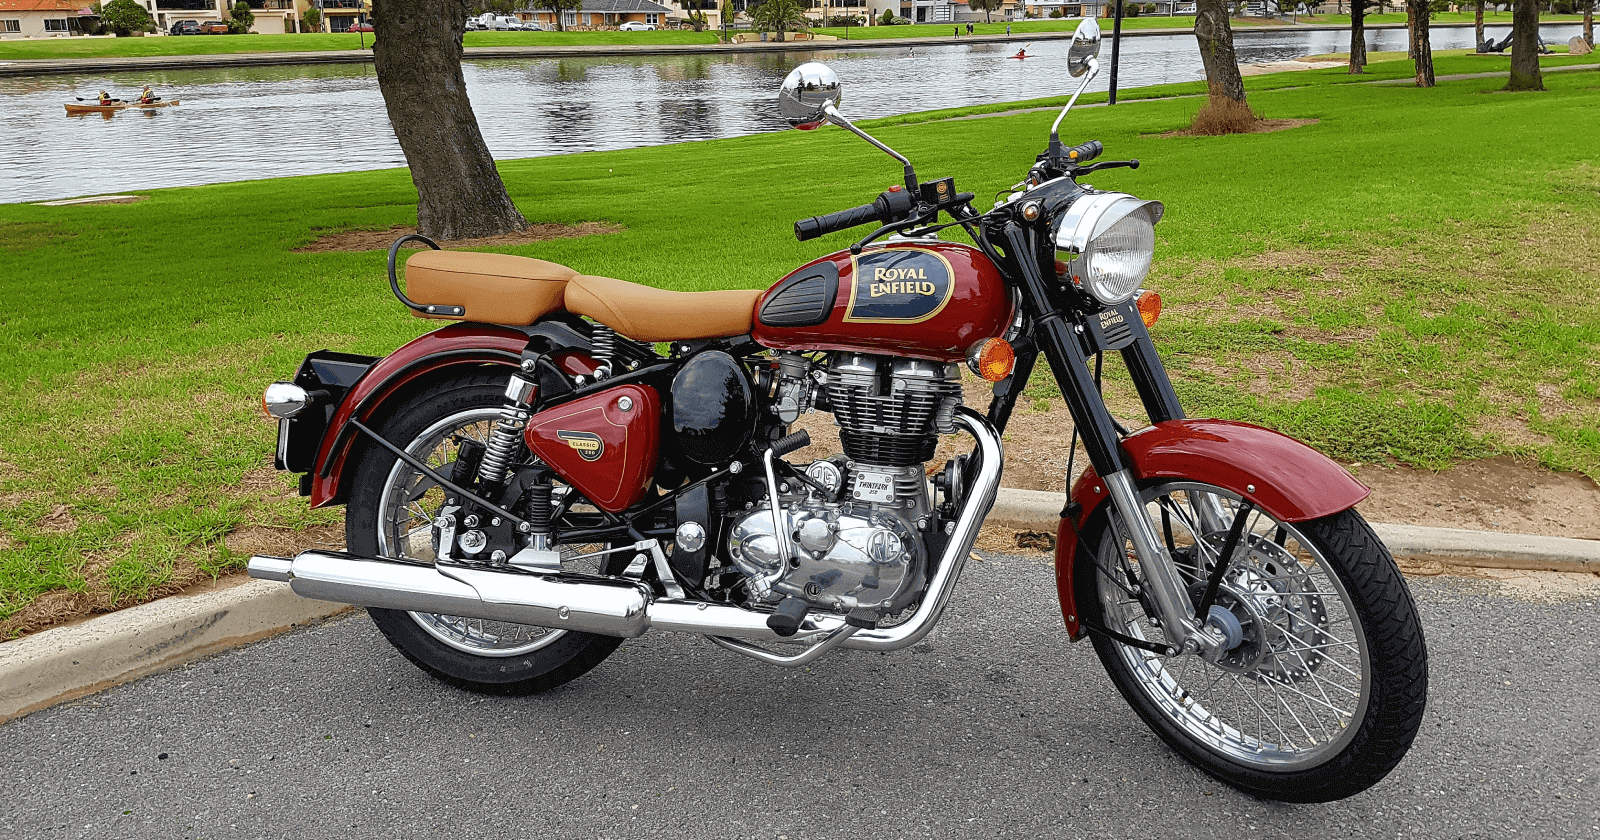 Best Royal Enfield bikes in India 2023